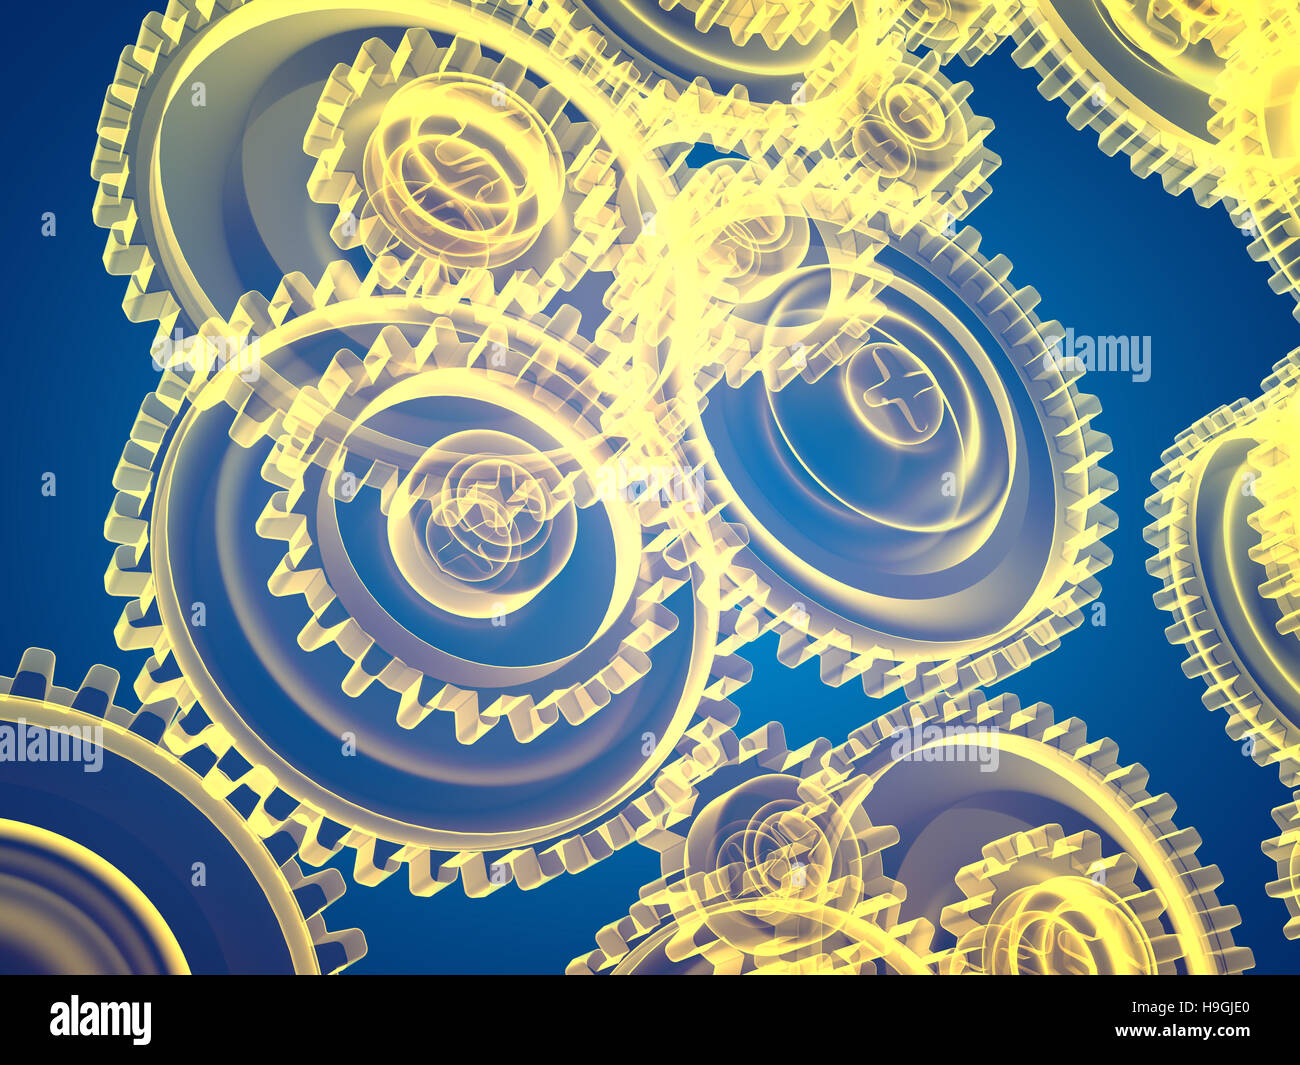 Set Of Gears For Unity Meaning Focus On Fronts Gear Of Pic On Isolated  Background Stock Photo, Picture and Royalty Free Image. Image 54600286.